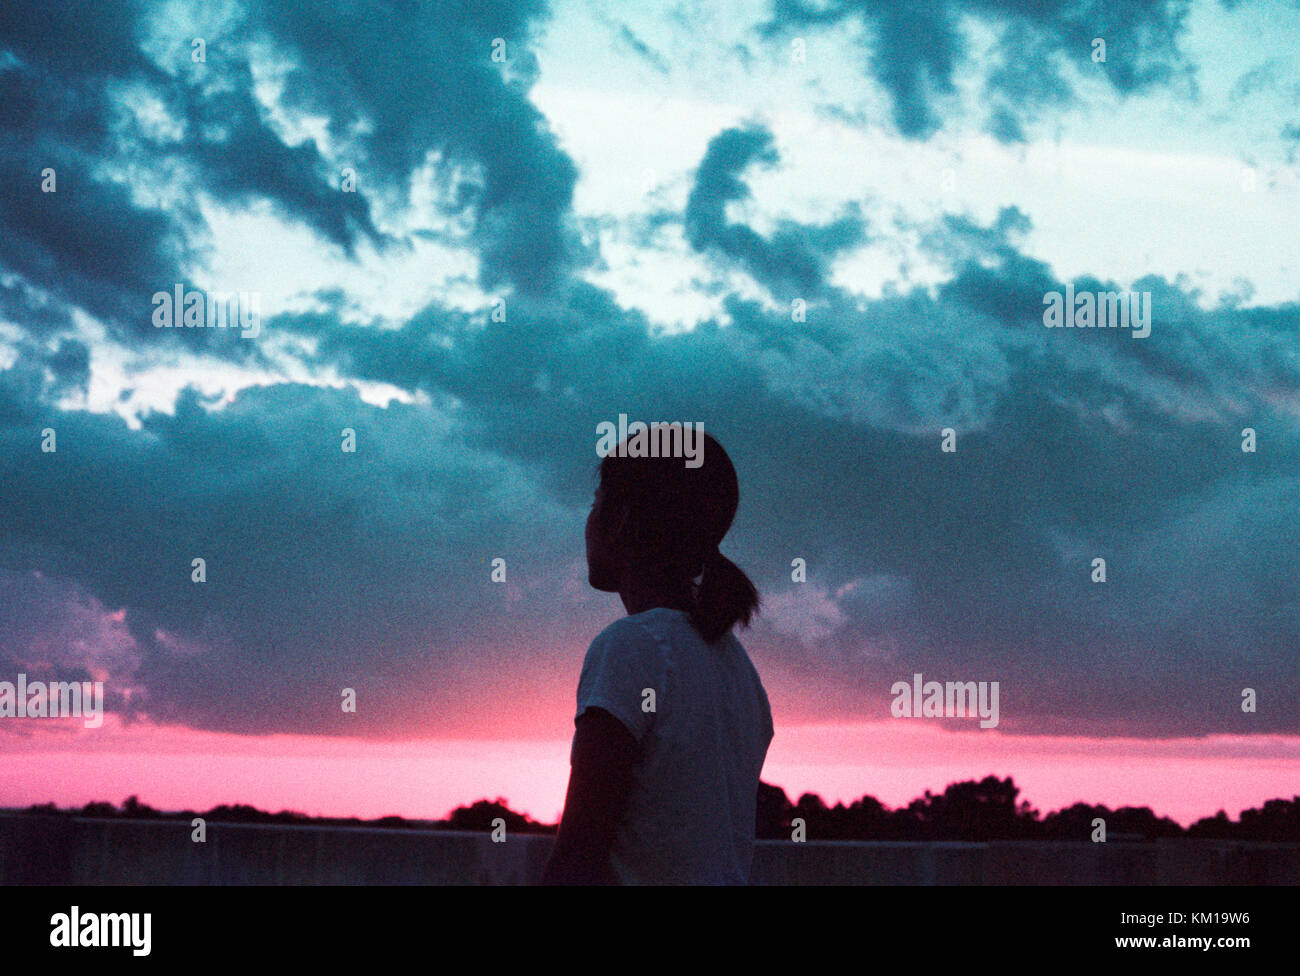 Silhouette of woman looking out at the cloudy sunset sky Stock Photo